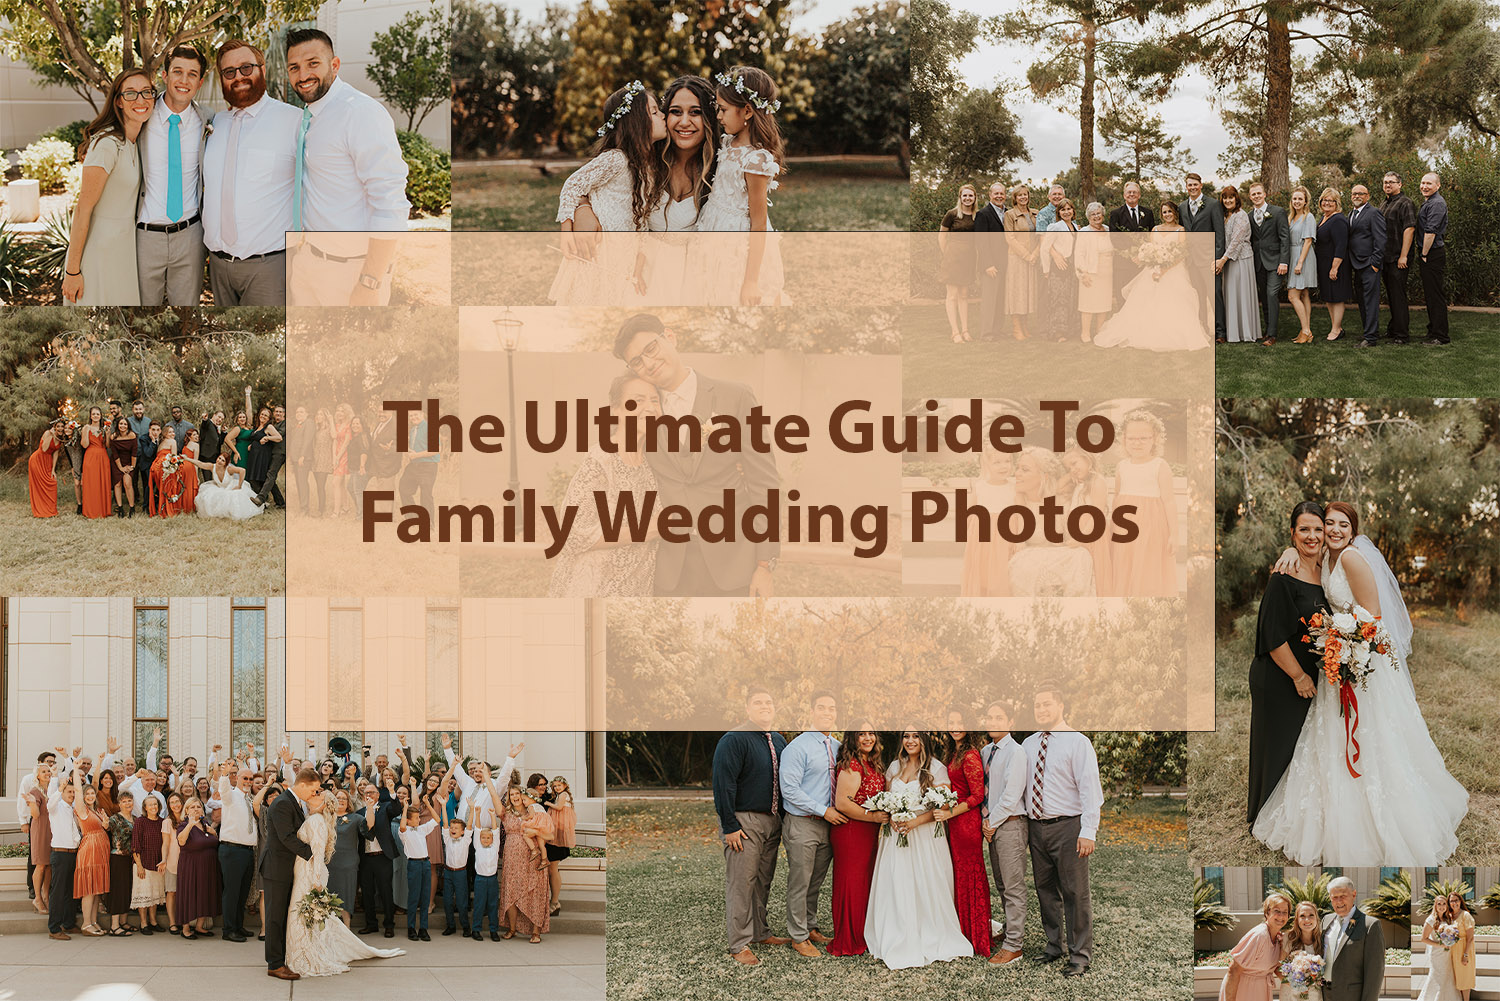 How to Get Fun, Fast Family Wedding Photos